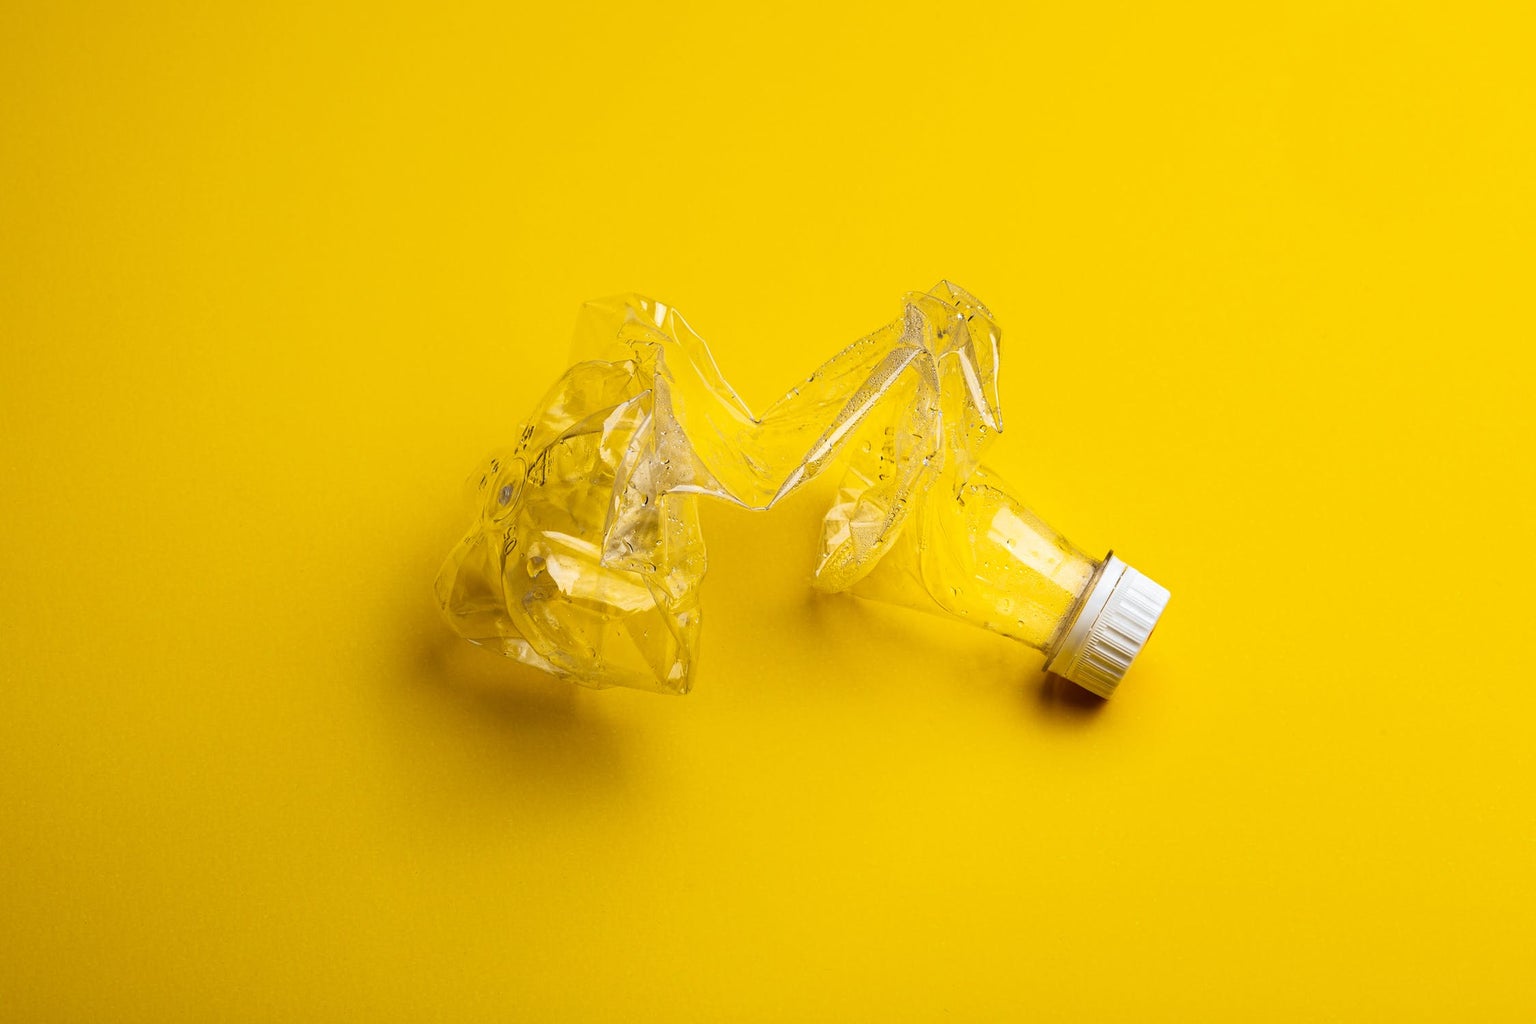 plastic bottle crushed against yellow background